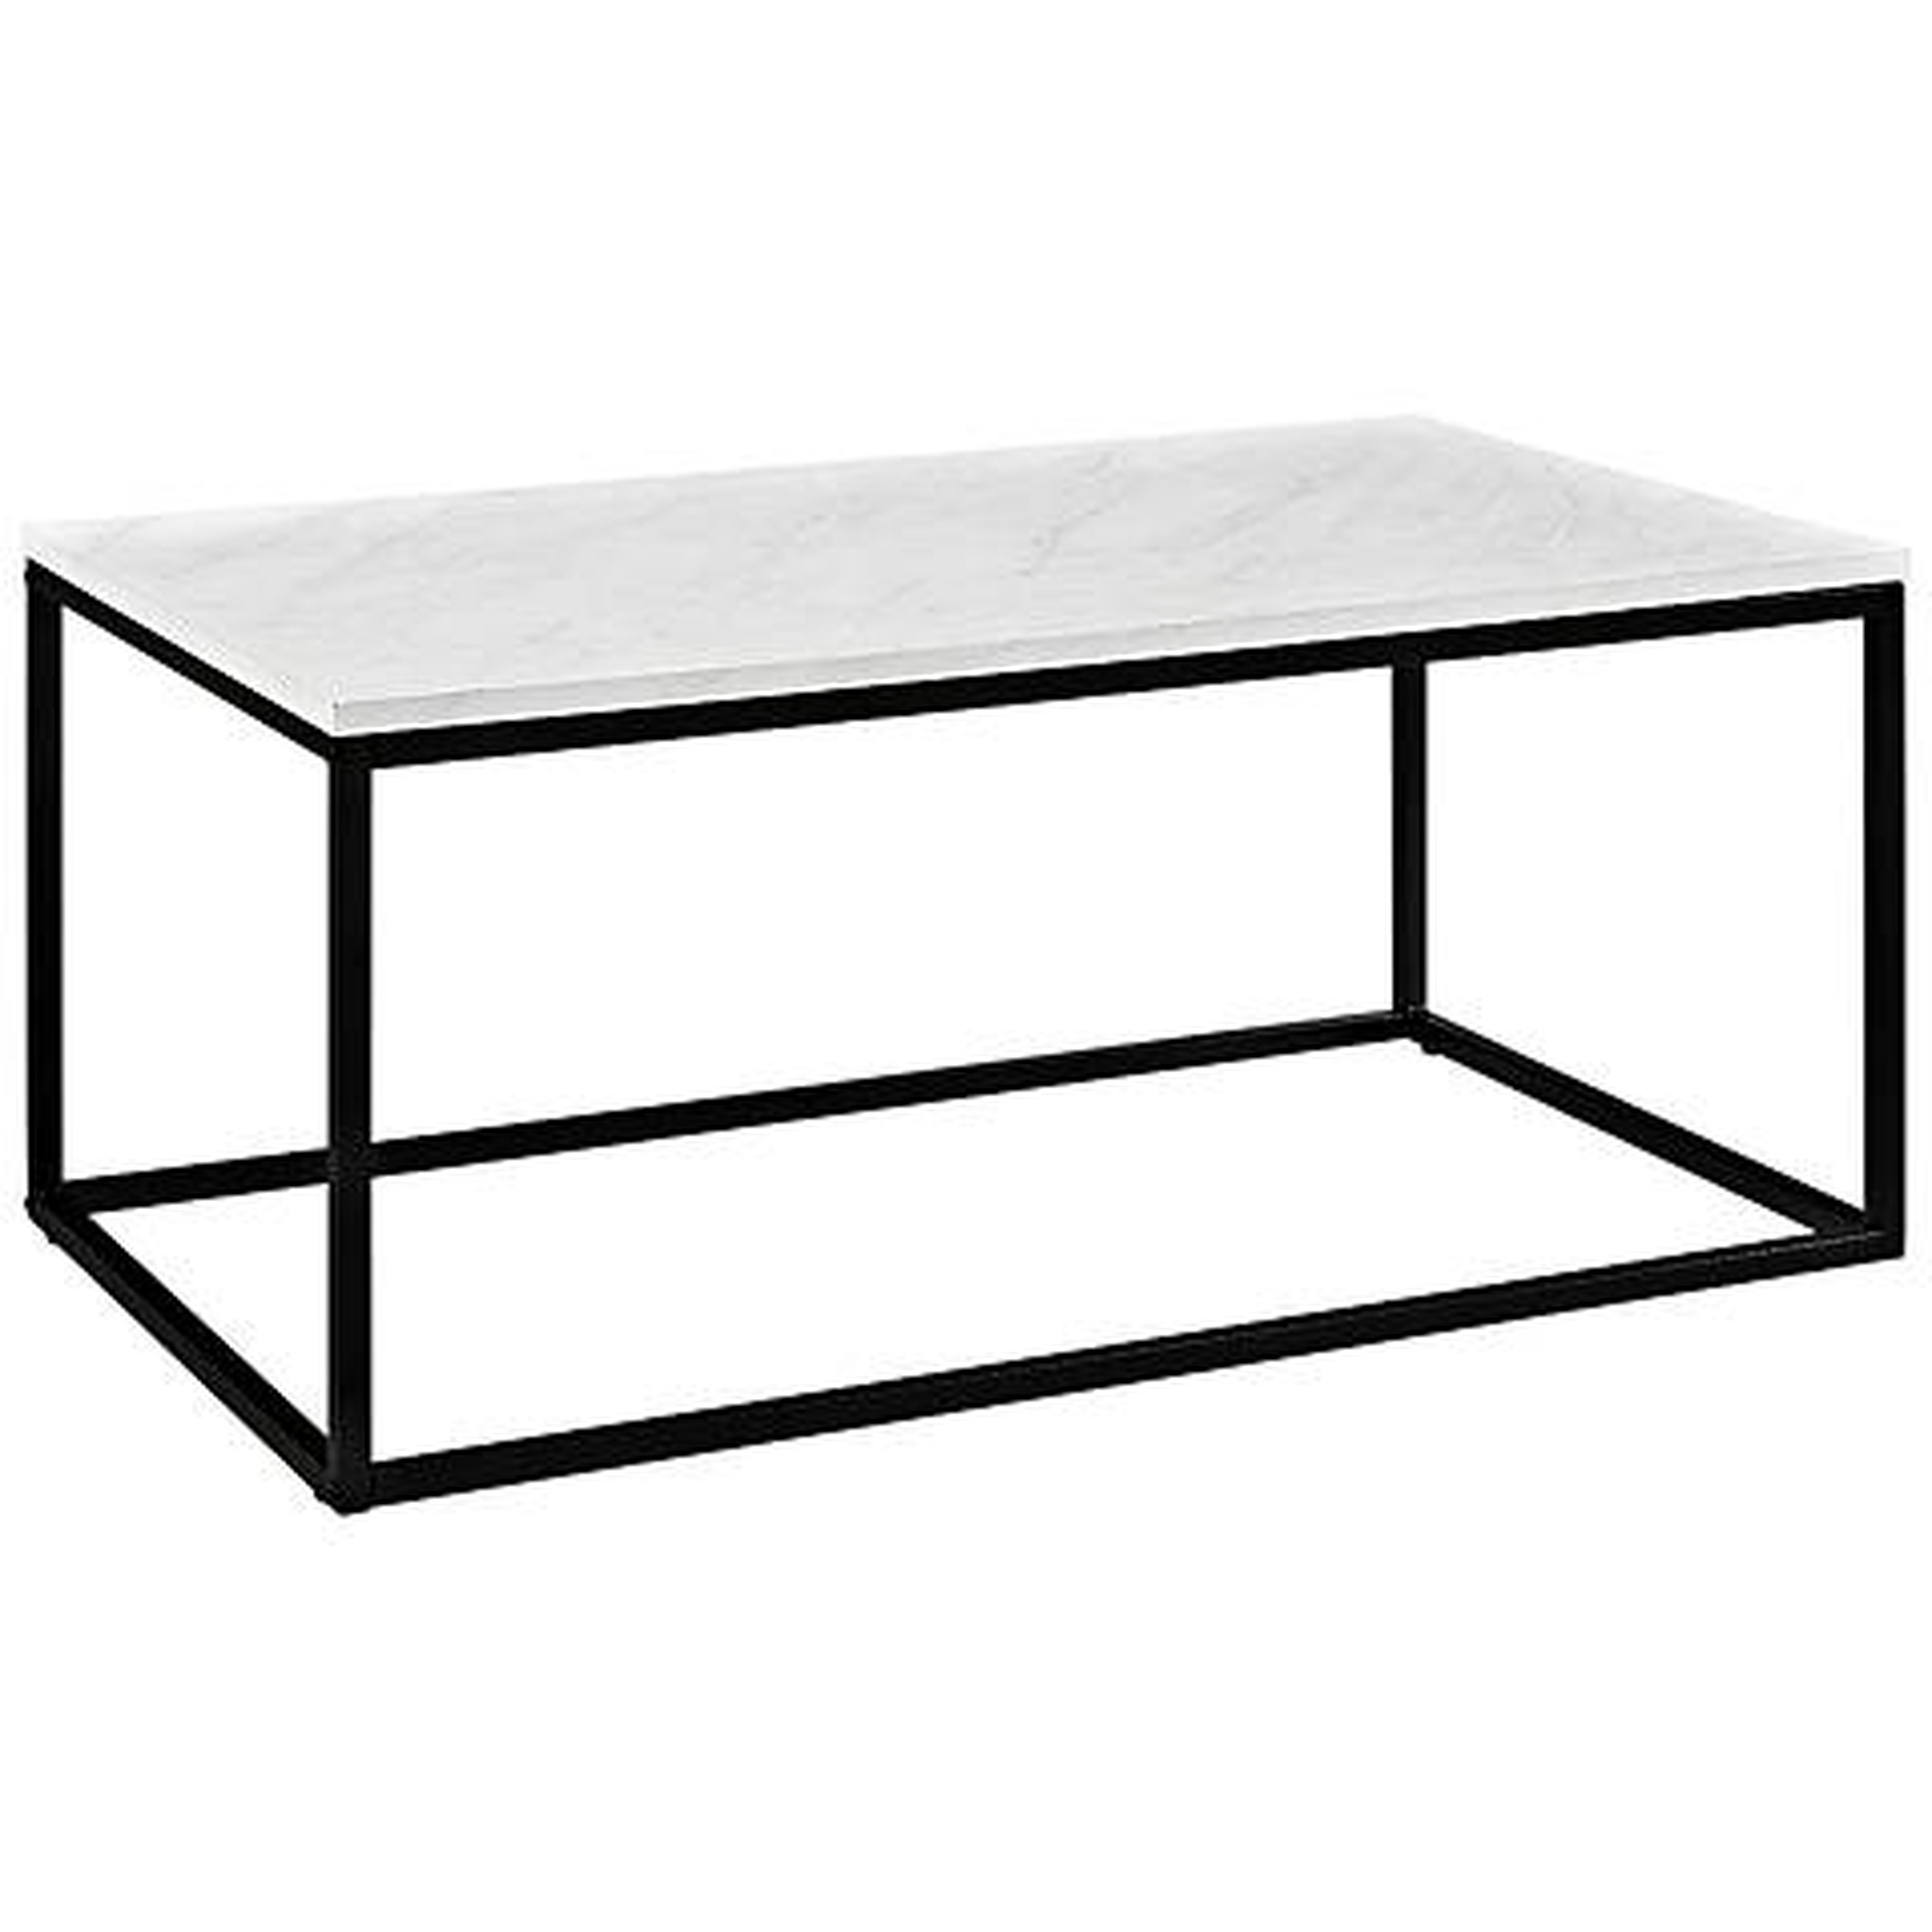 Adeline Faux Marble Top and Metal Coffee Table white - Lamps Plus